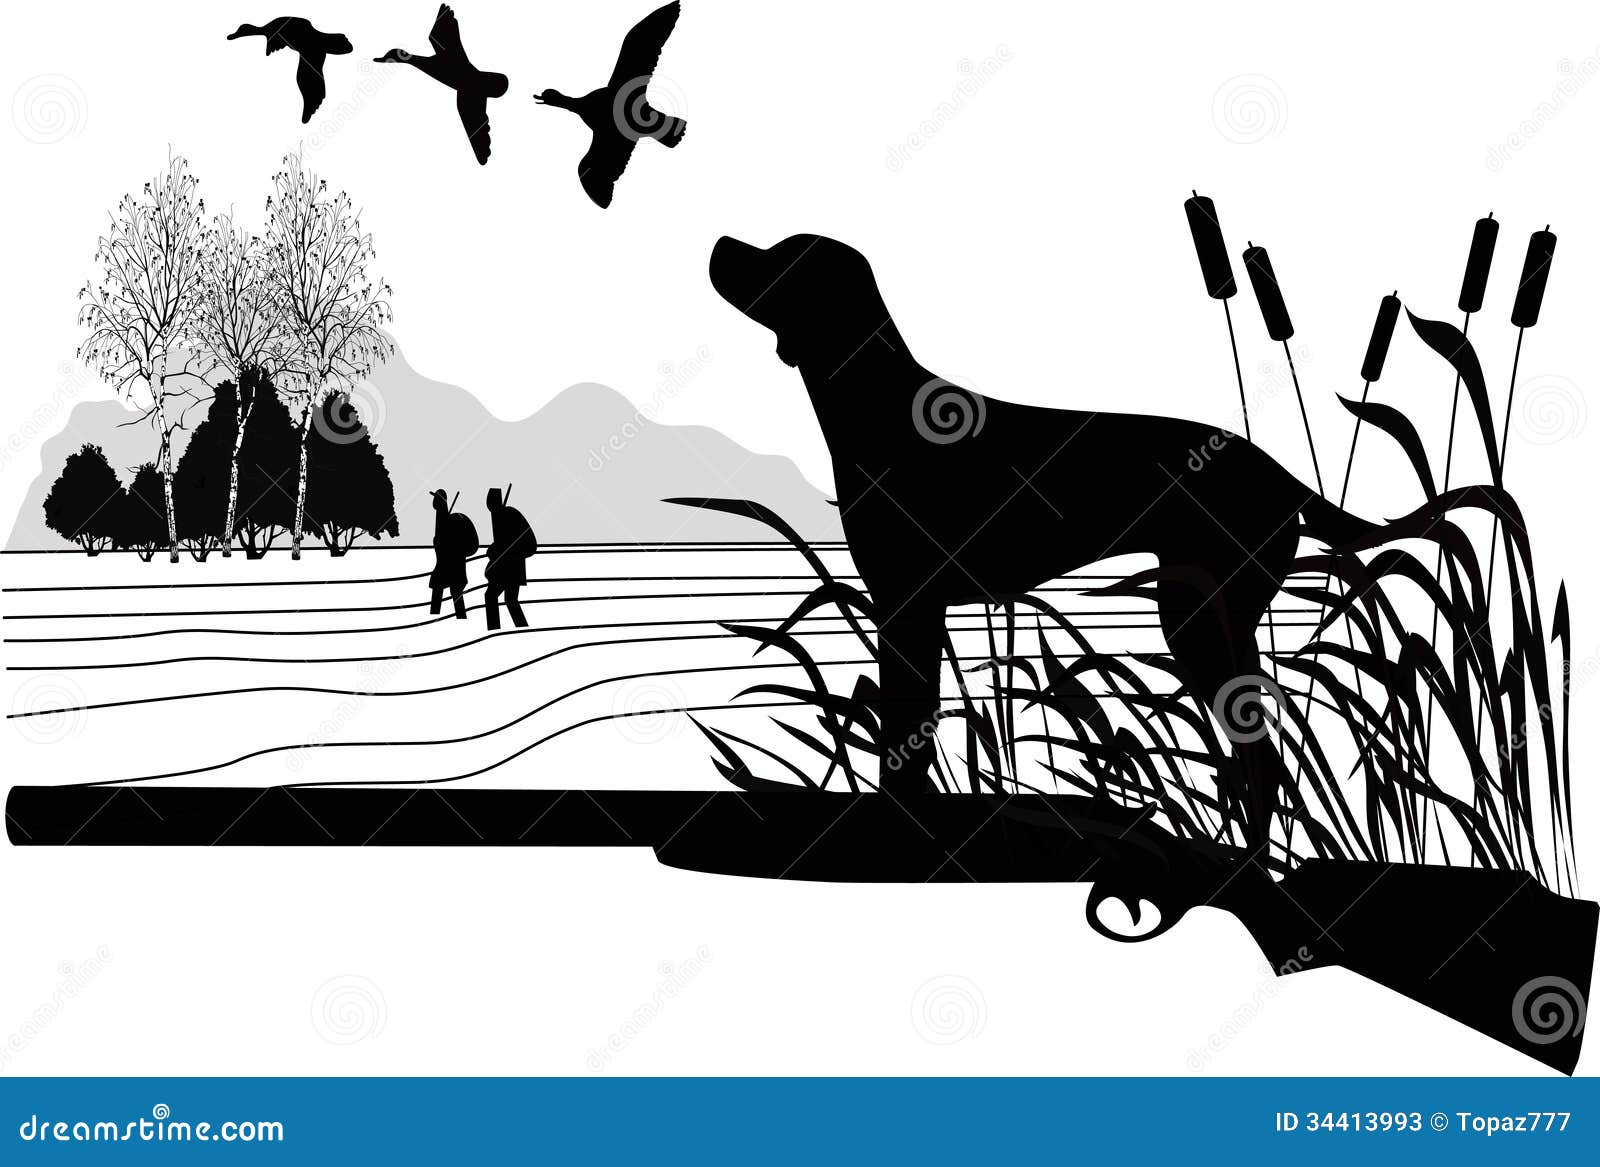 Dogs of a duck hunting stock vector. Illustration of landscape - 34413993